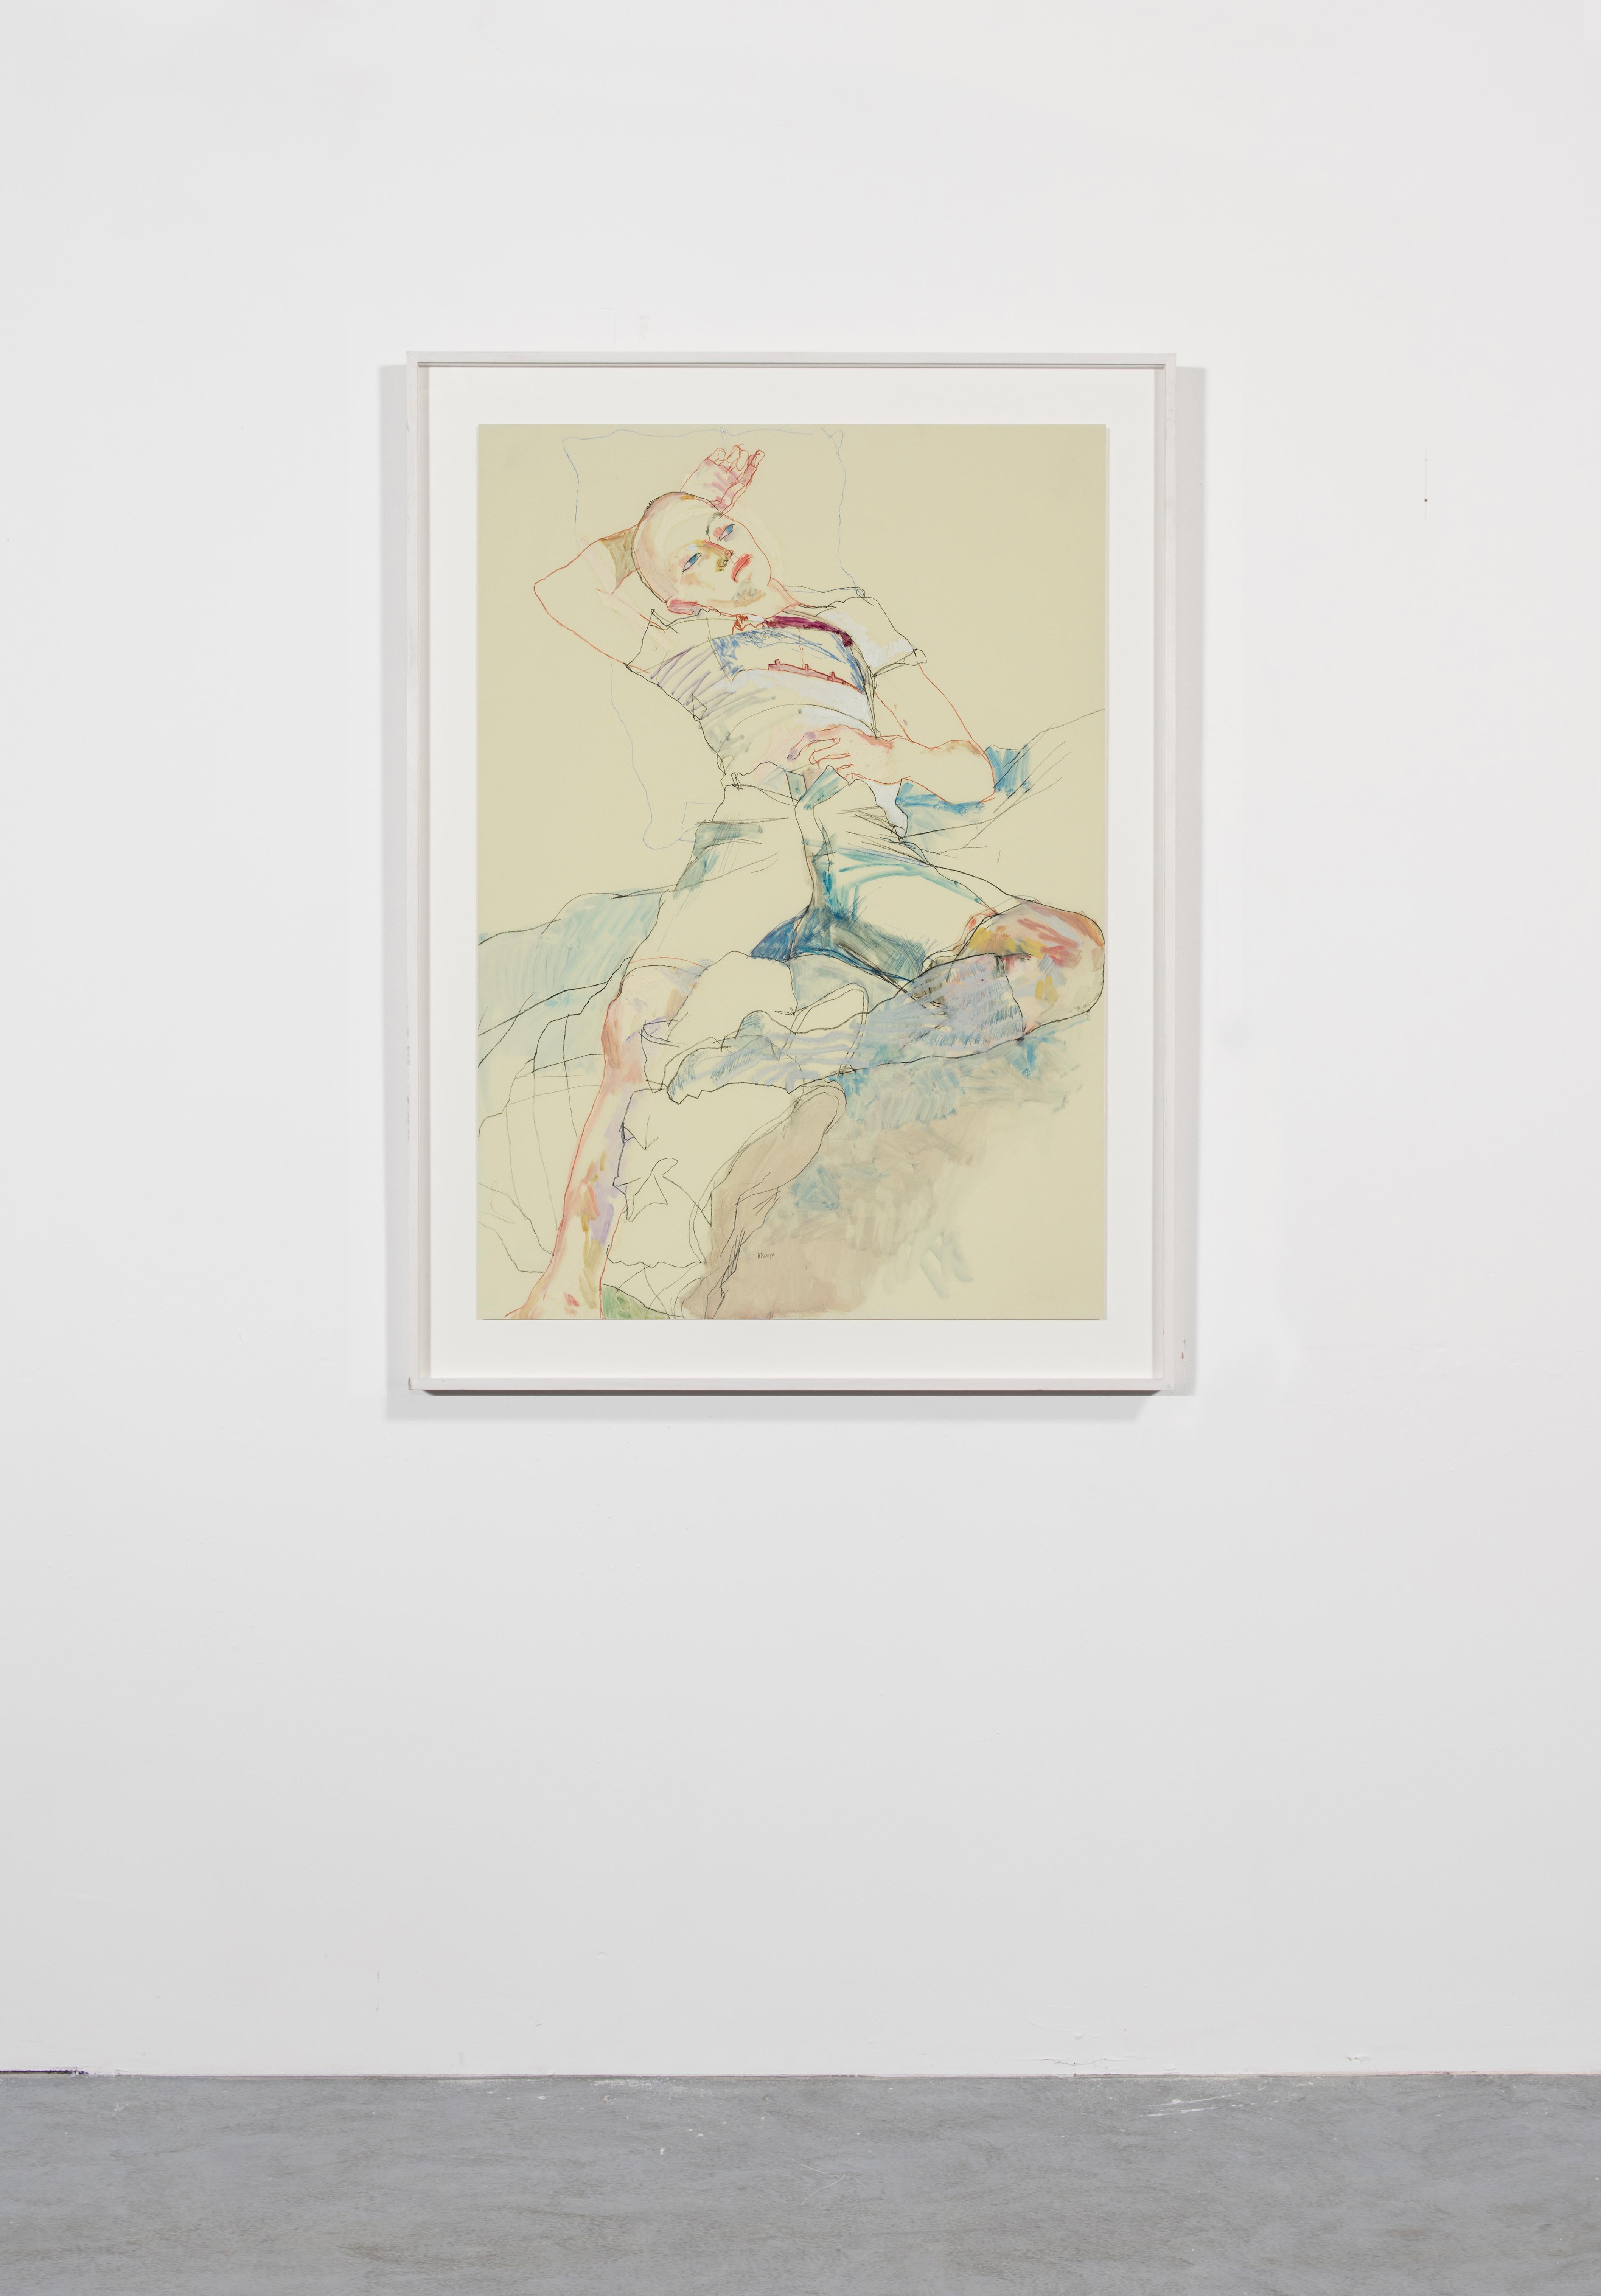 Matthew (Lying, Hand Under Head - Blues), Mixed media on Pergamenata parchment - Contemporary Painting by Howard Tangye